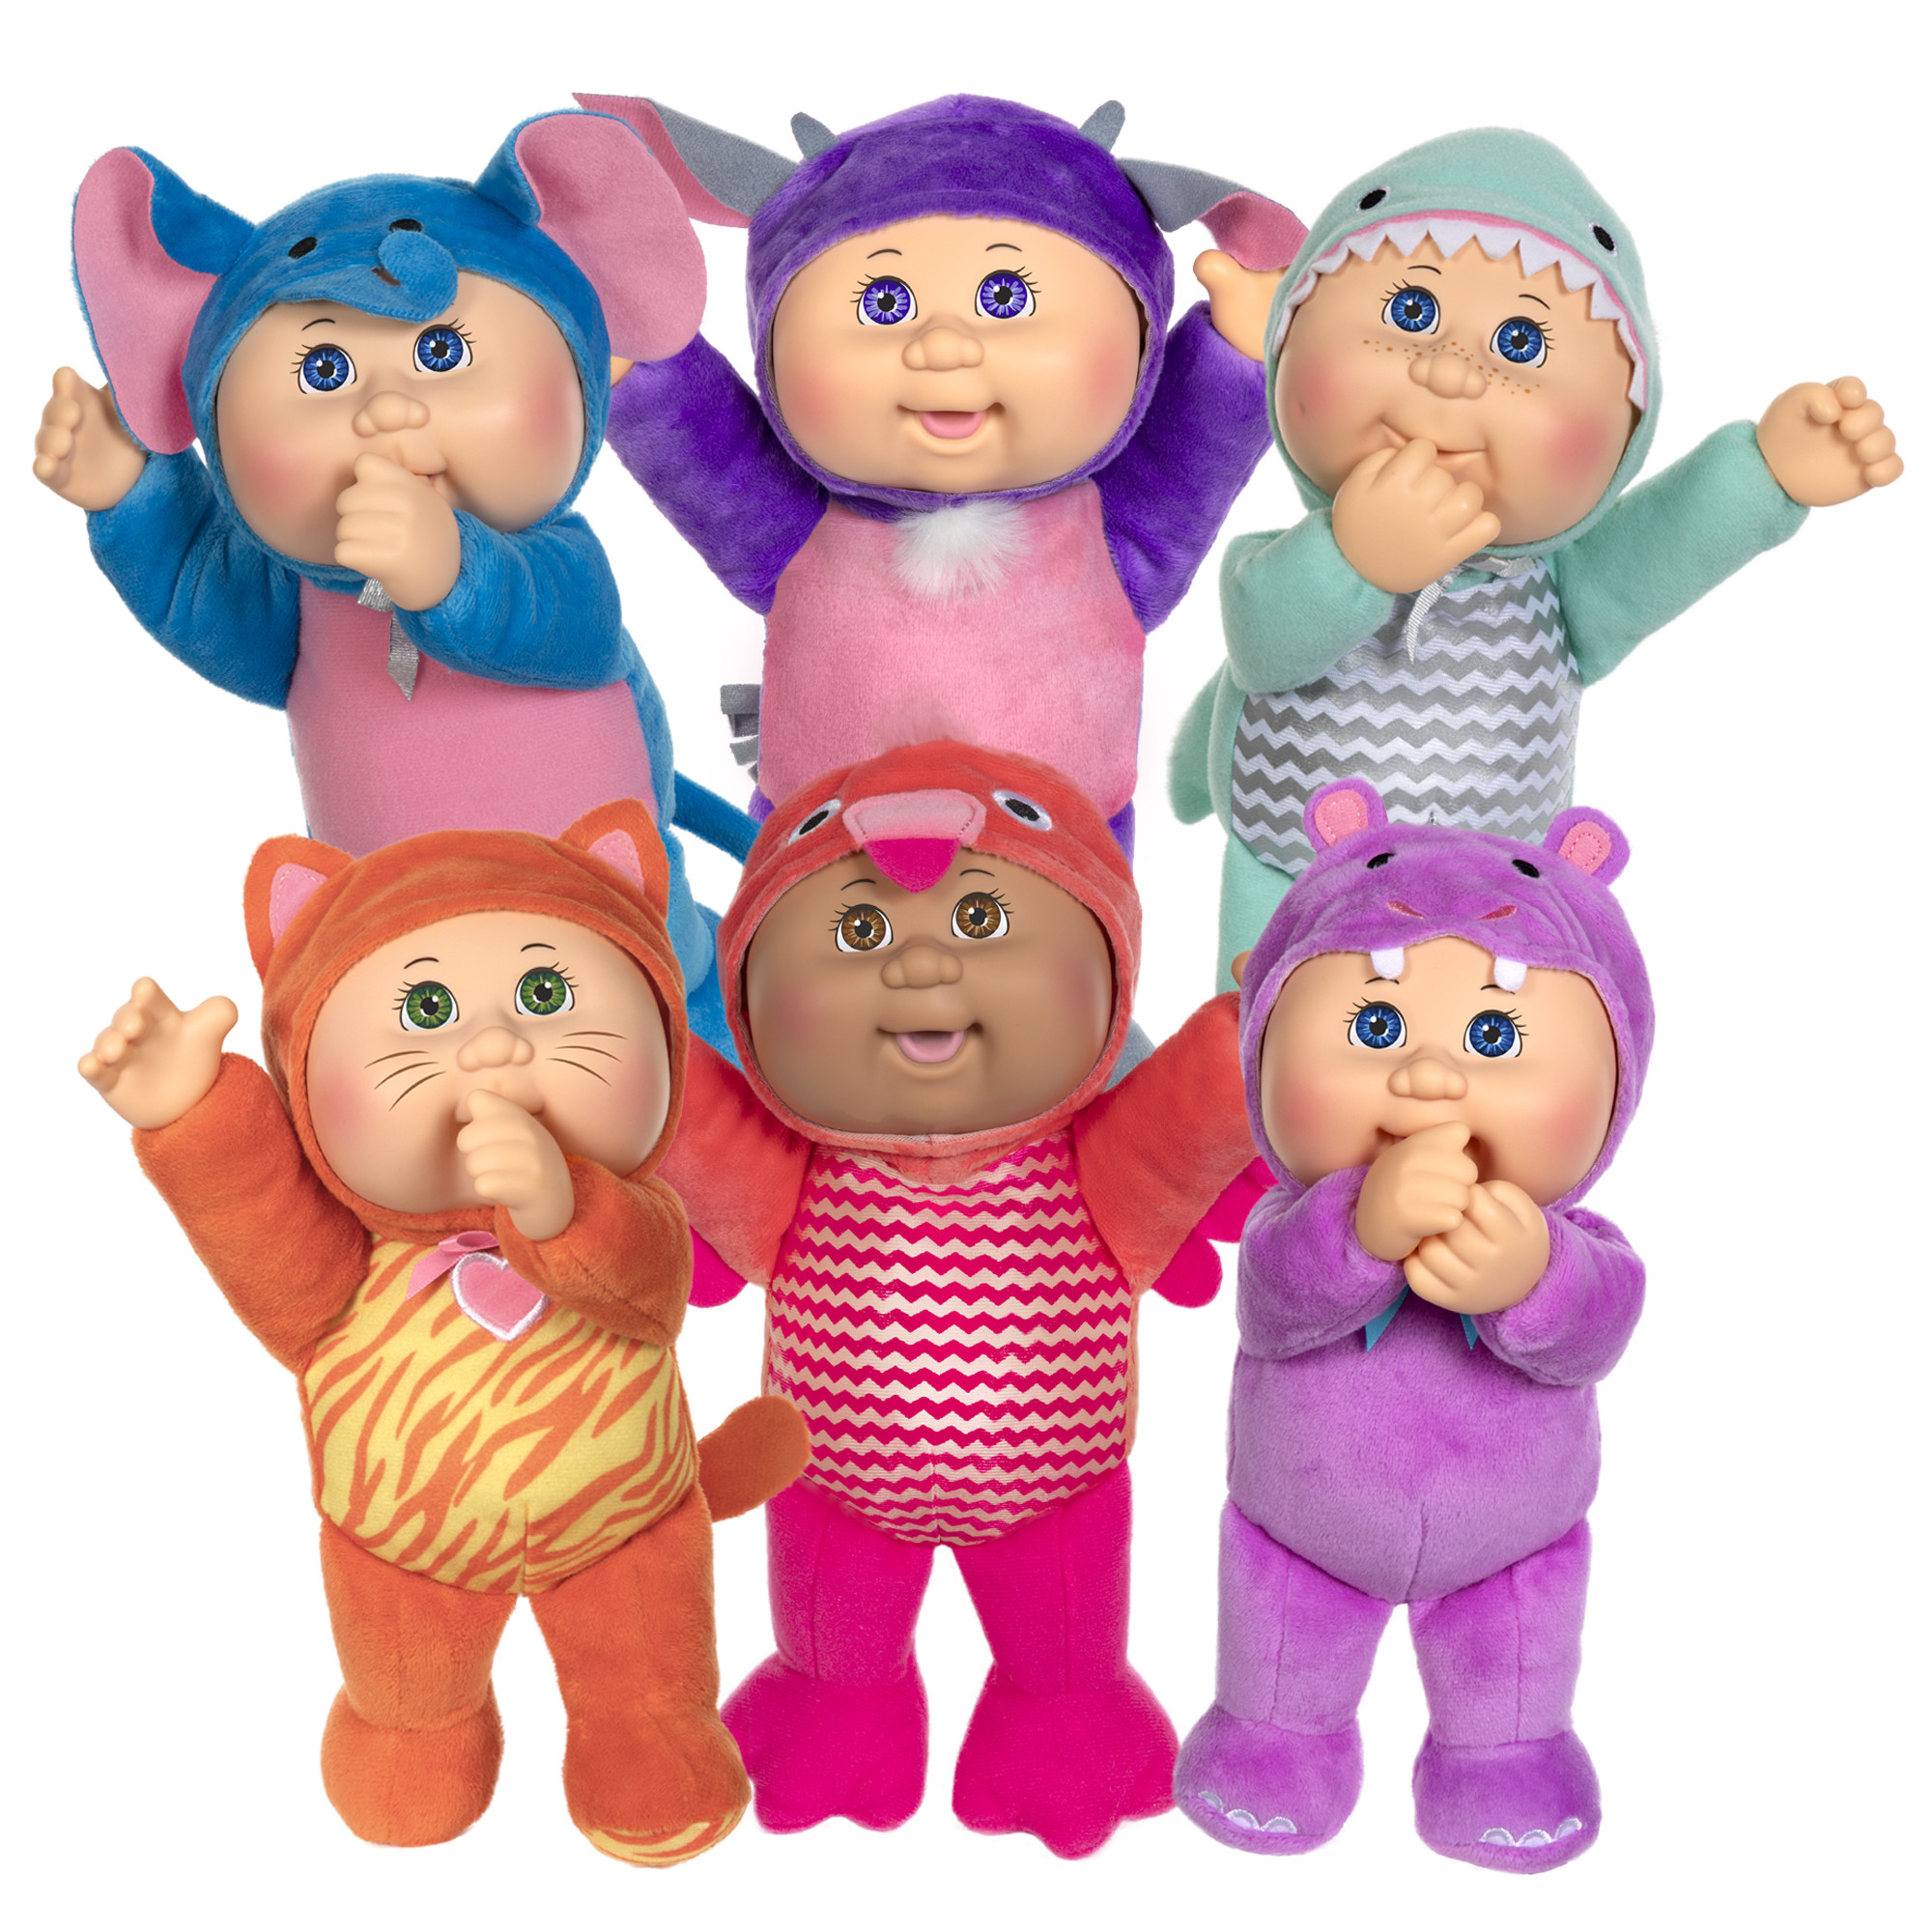 Cabbage Patch Kids Awesome Cabbage Patch Kids Collectible 9in Cuties Exotic